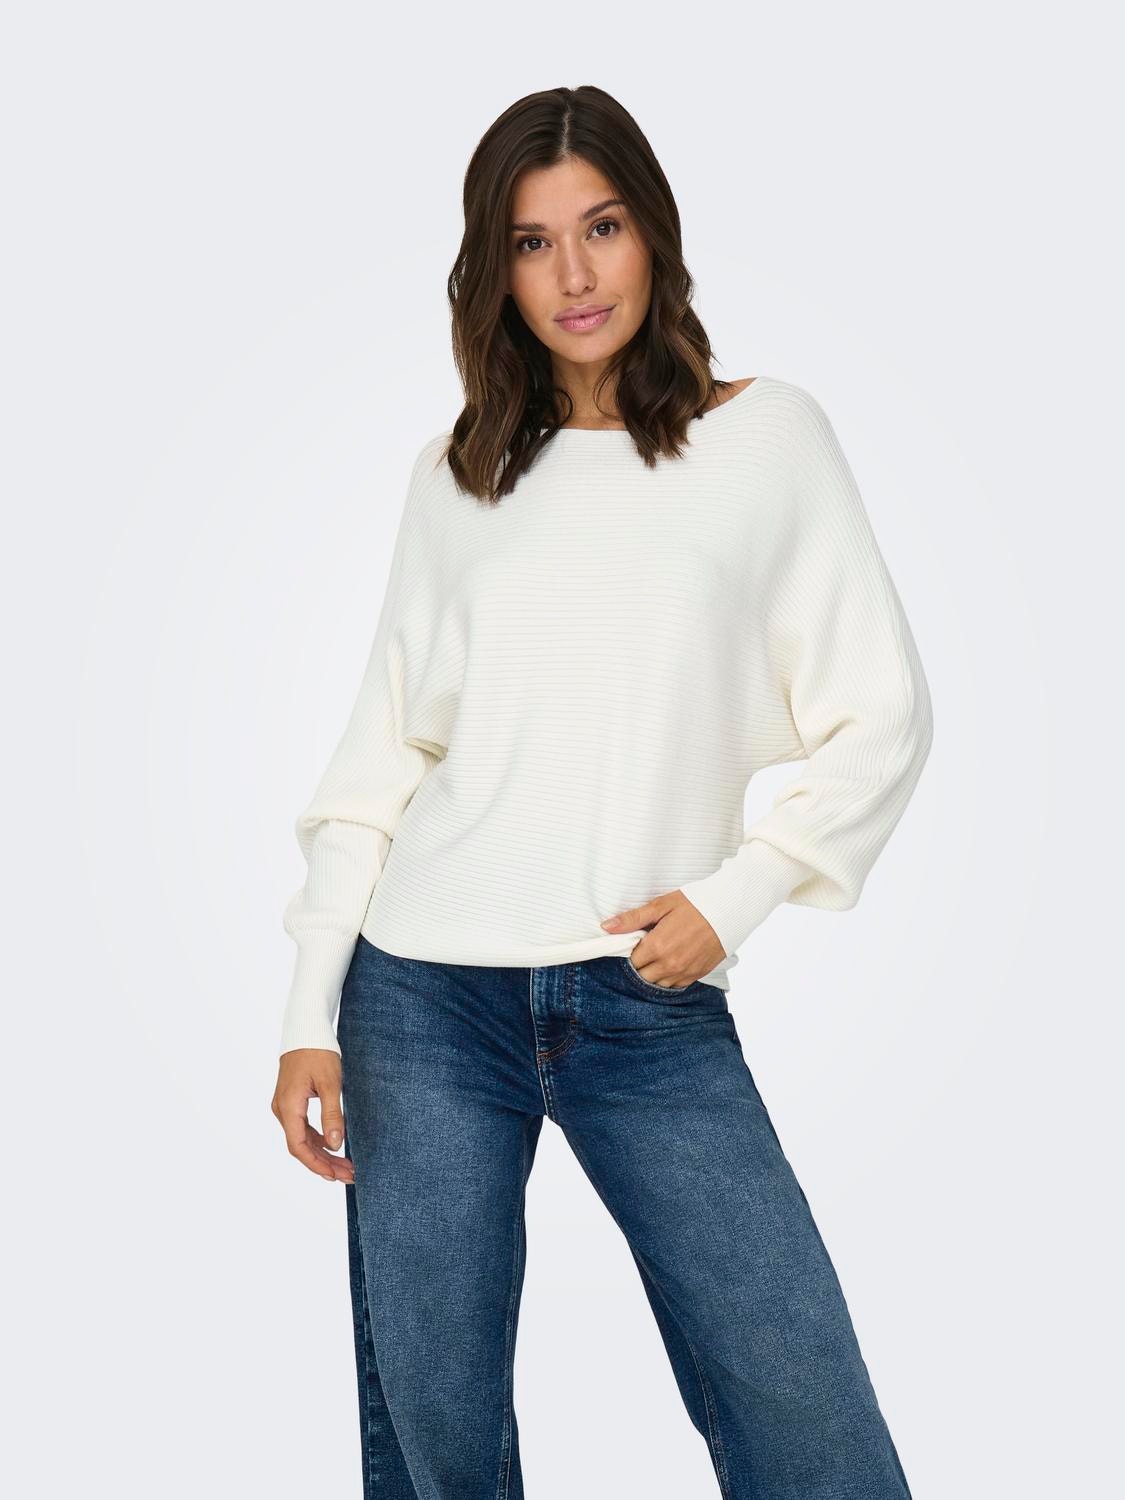 ONLY Pull-overs Col bateau Bas hauts -Snow White - 15226298